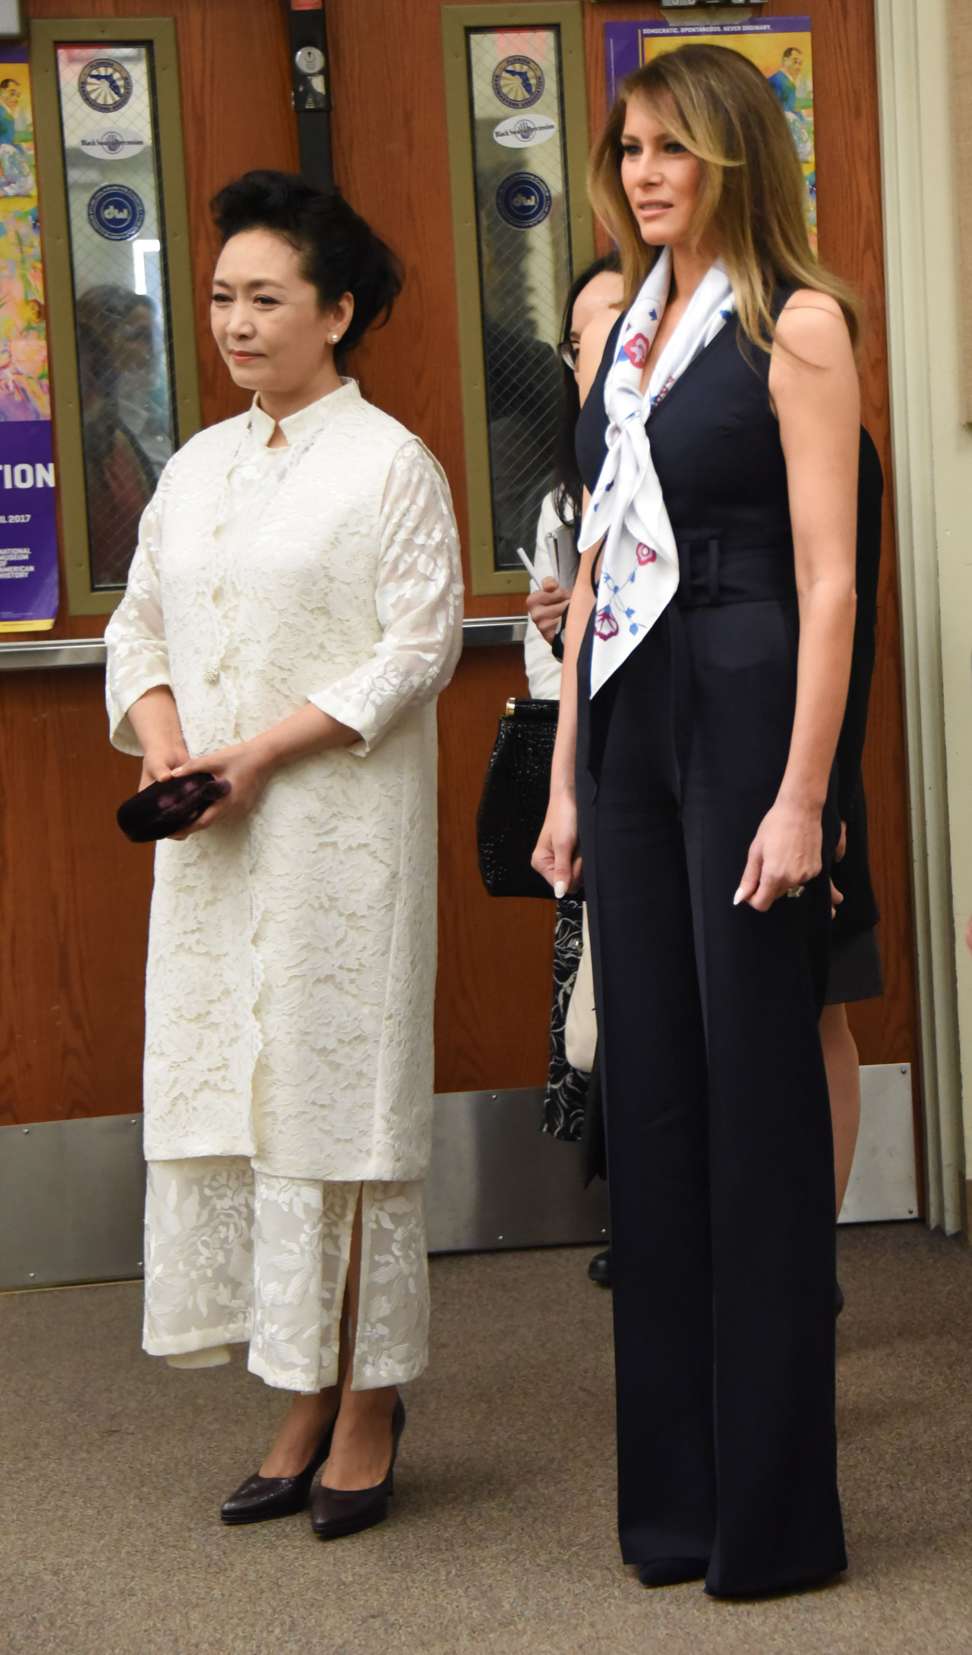 China’s first lady Peng Liyuan and US first lady Melania Trump visit the Bak Middle School of the Arts in Palm Beach, Florida, on Friday. Photo: AFP